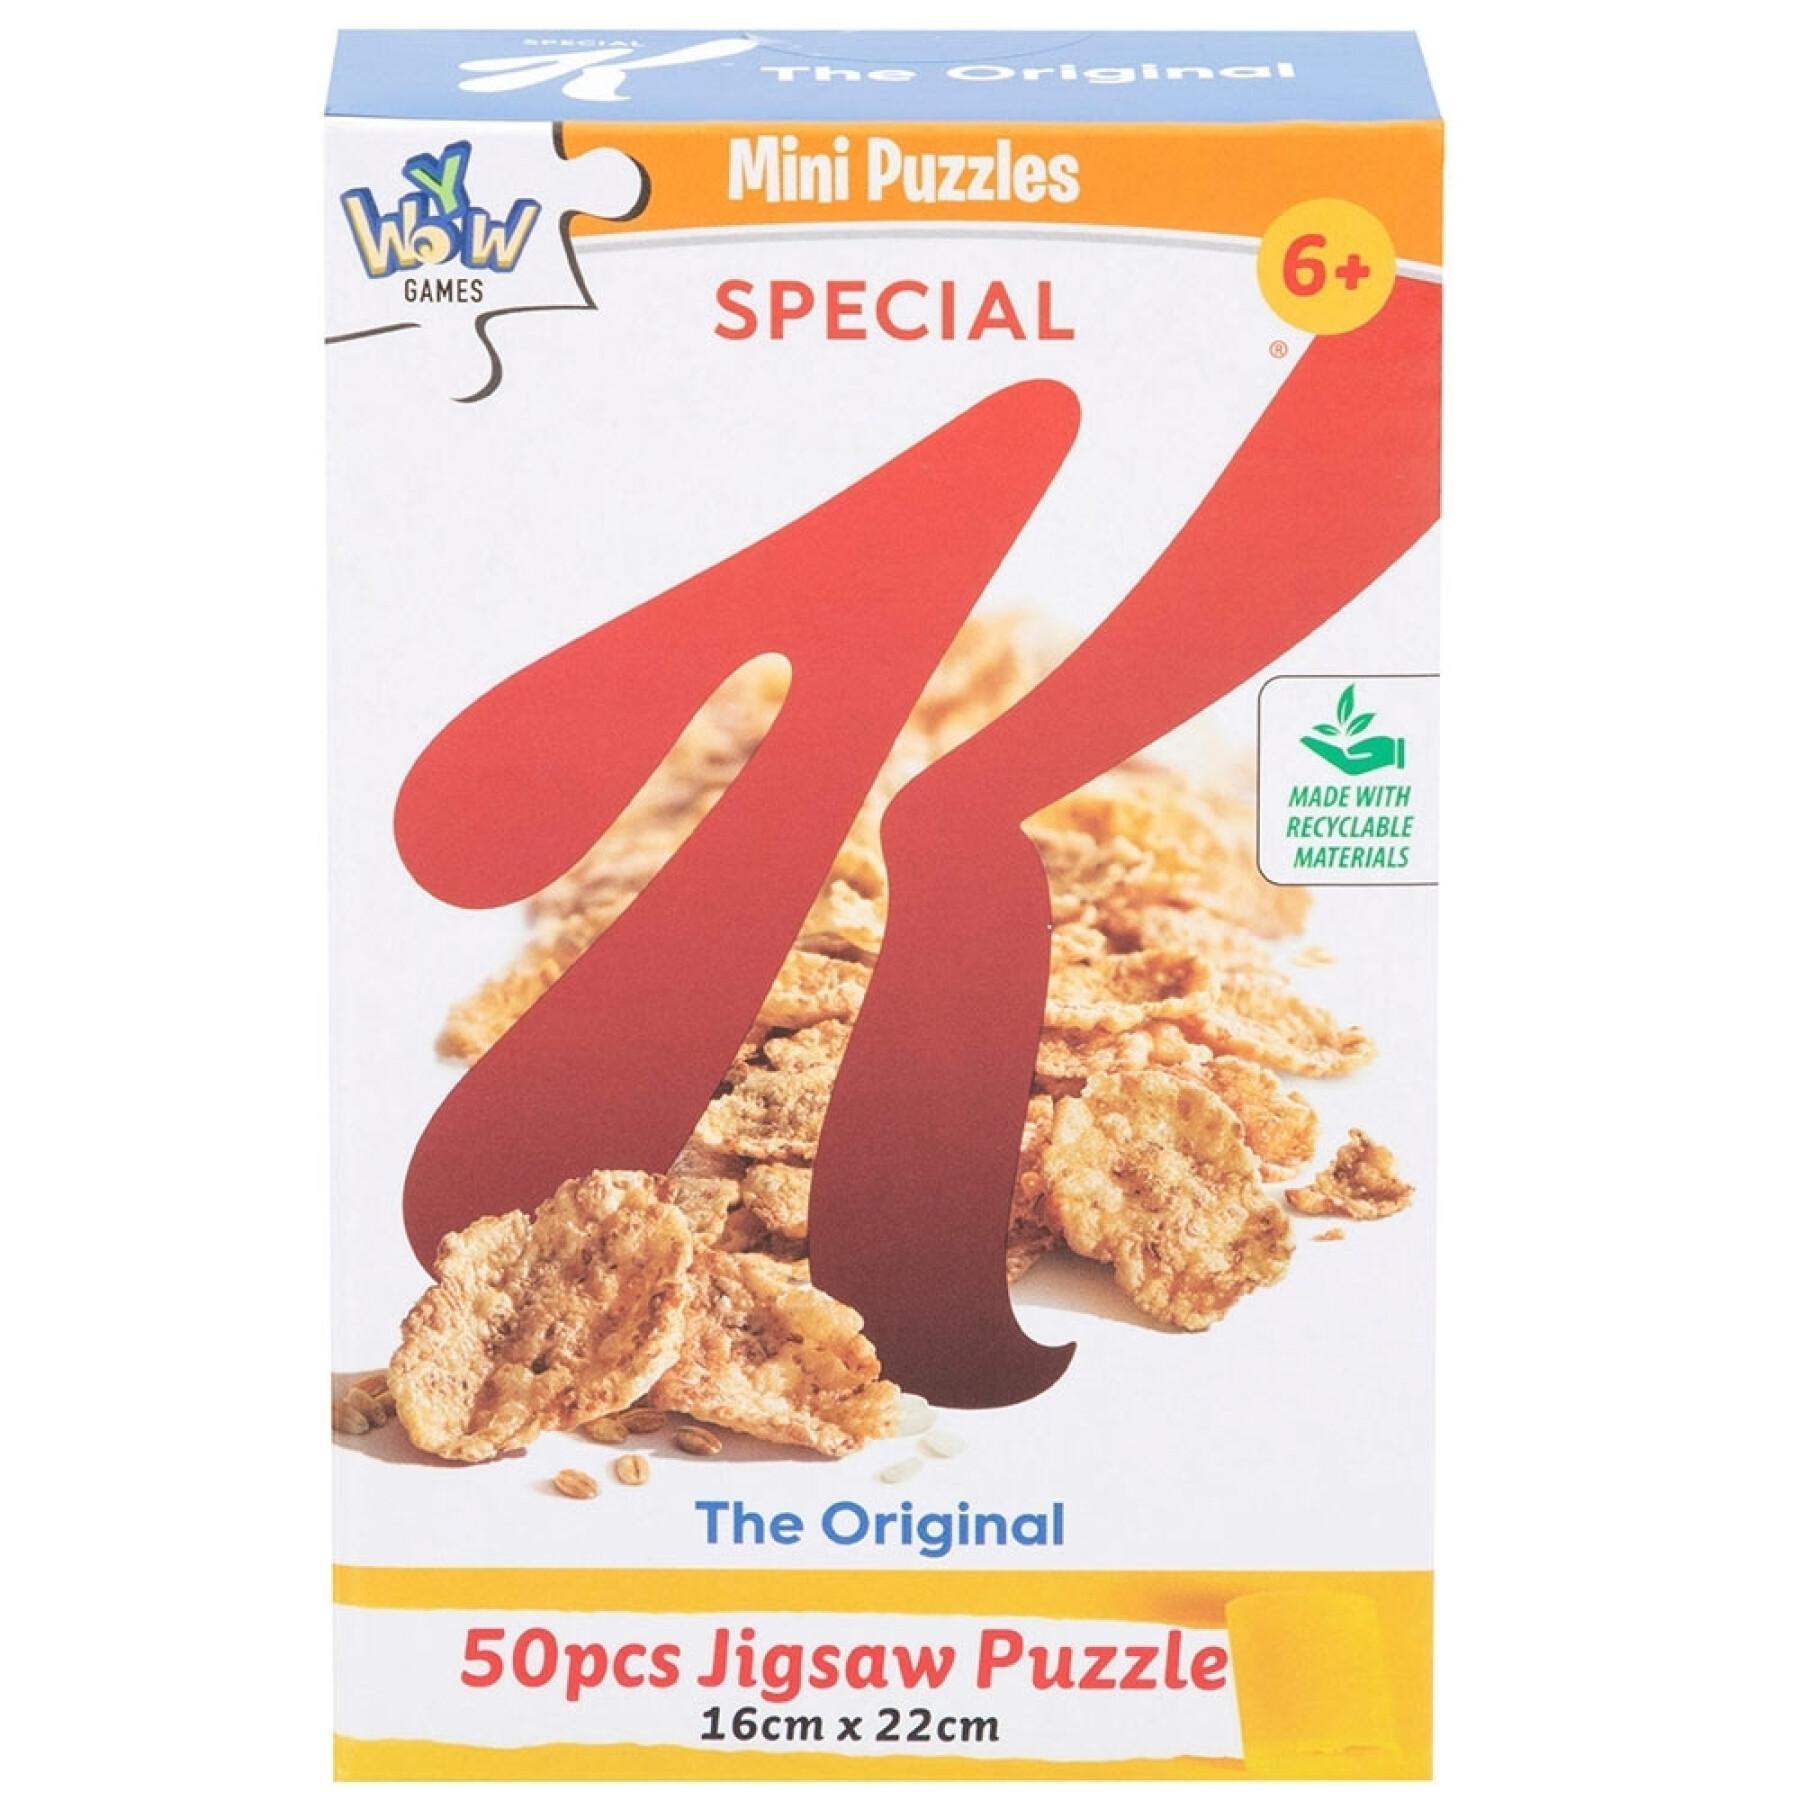 Pack of 6 minis puzzles of 50 pieces Kellogs